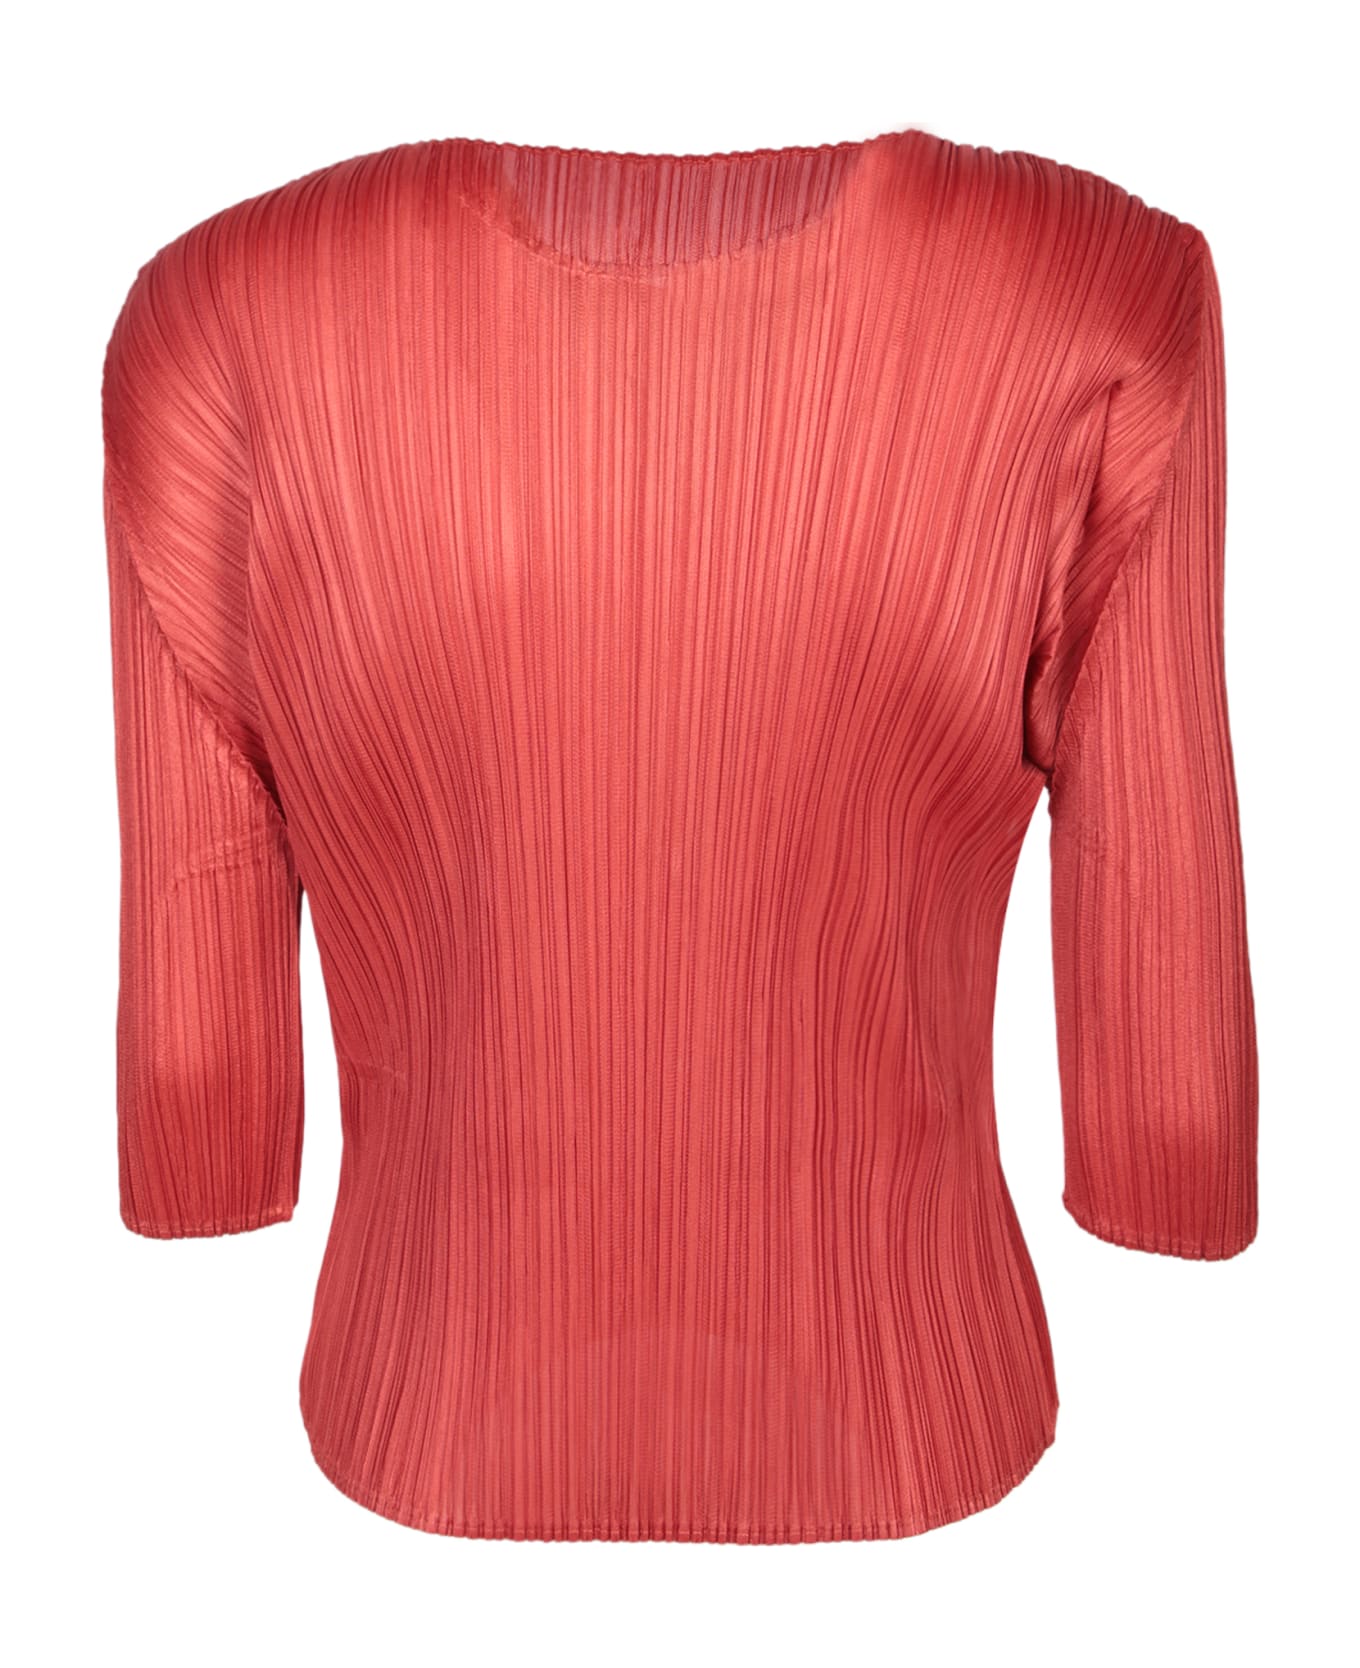 Issey Miyake Pleats Please Red T-shirt - Red